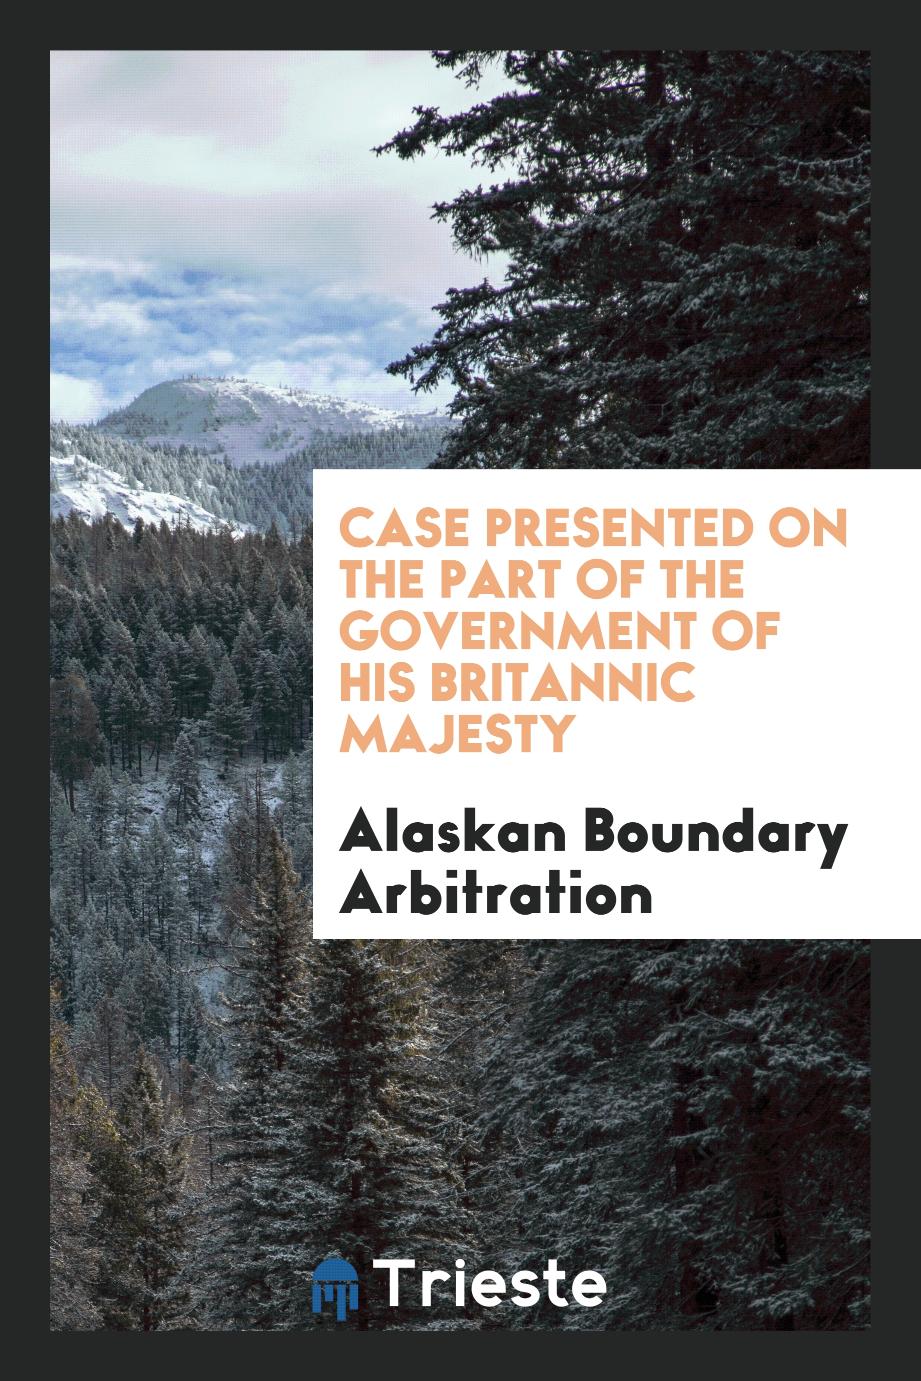 Case presented on the part of the Government of His Britannic Majesty